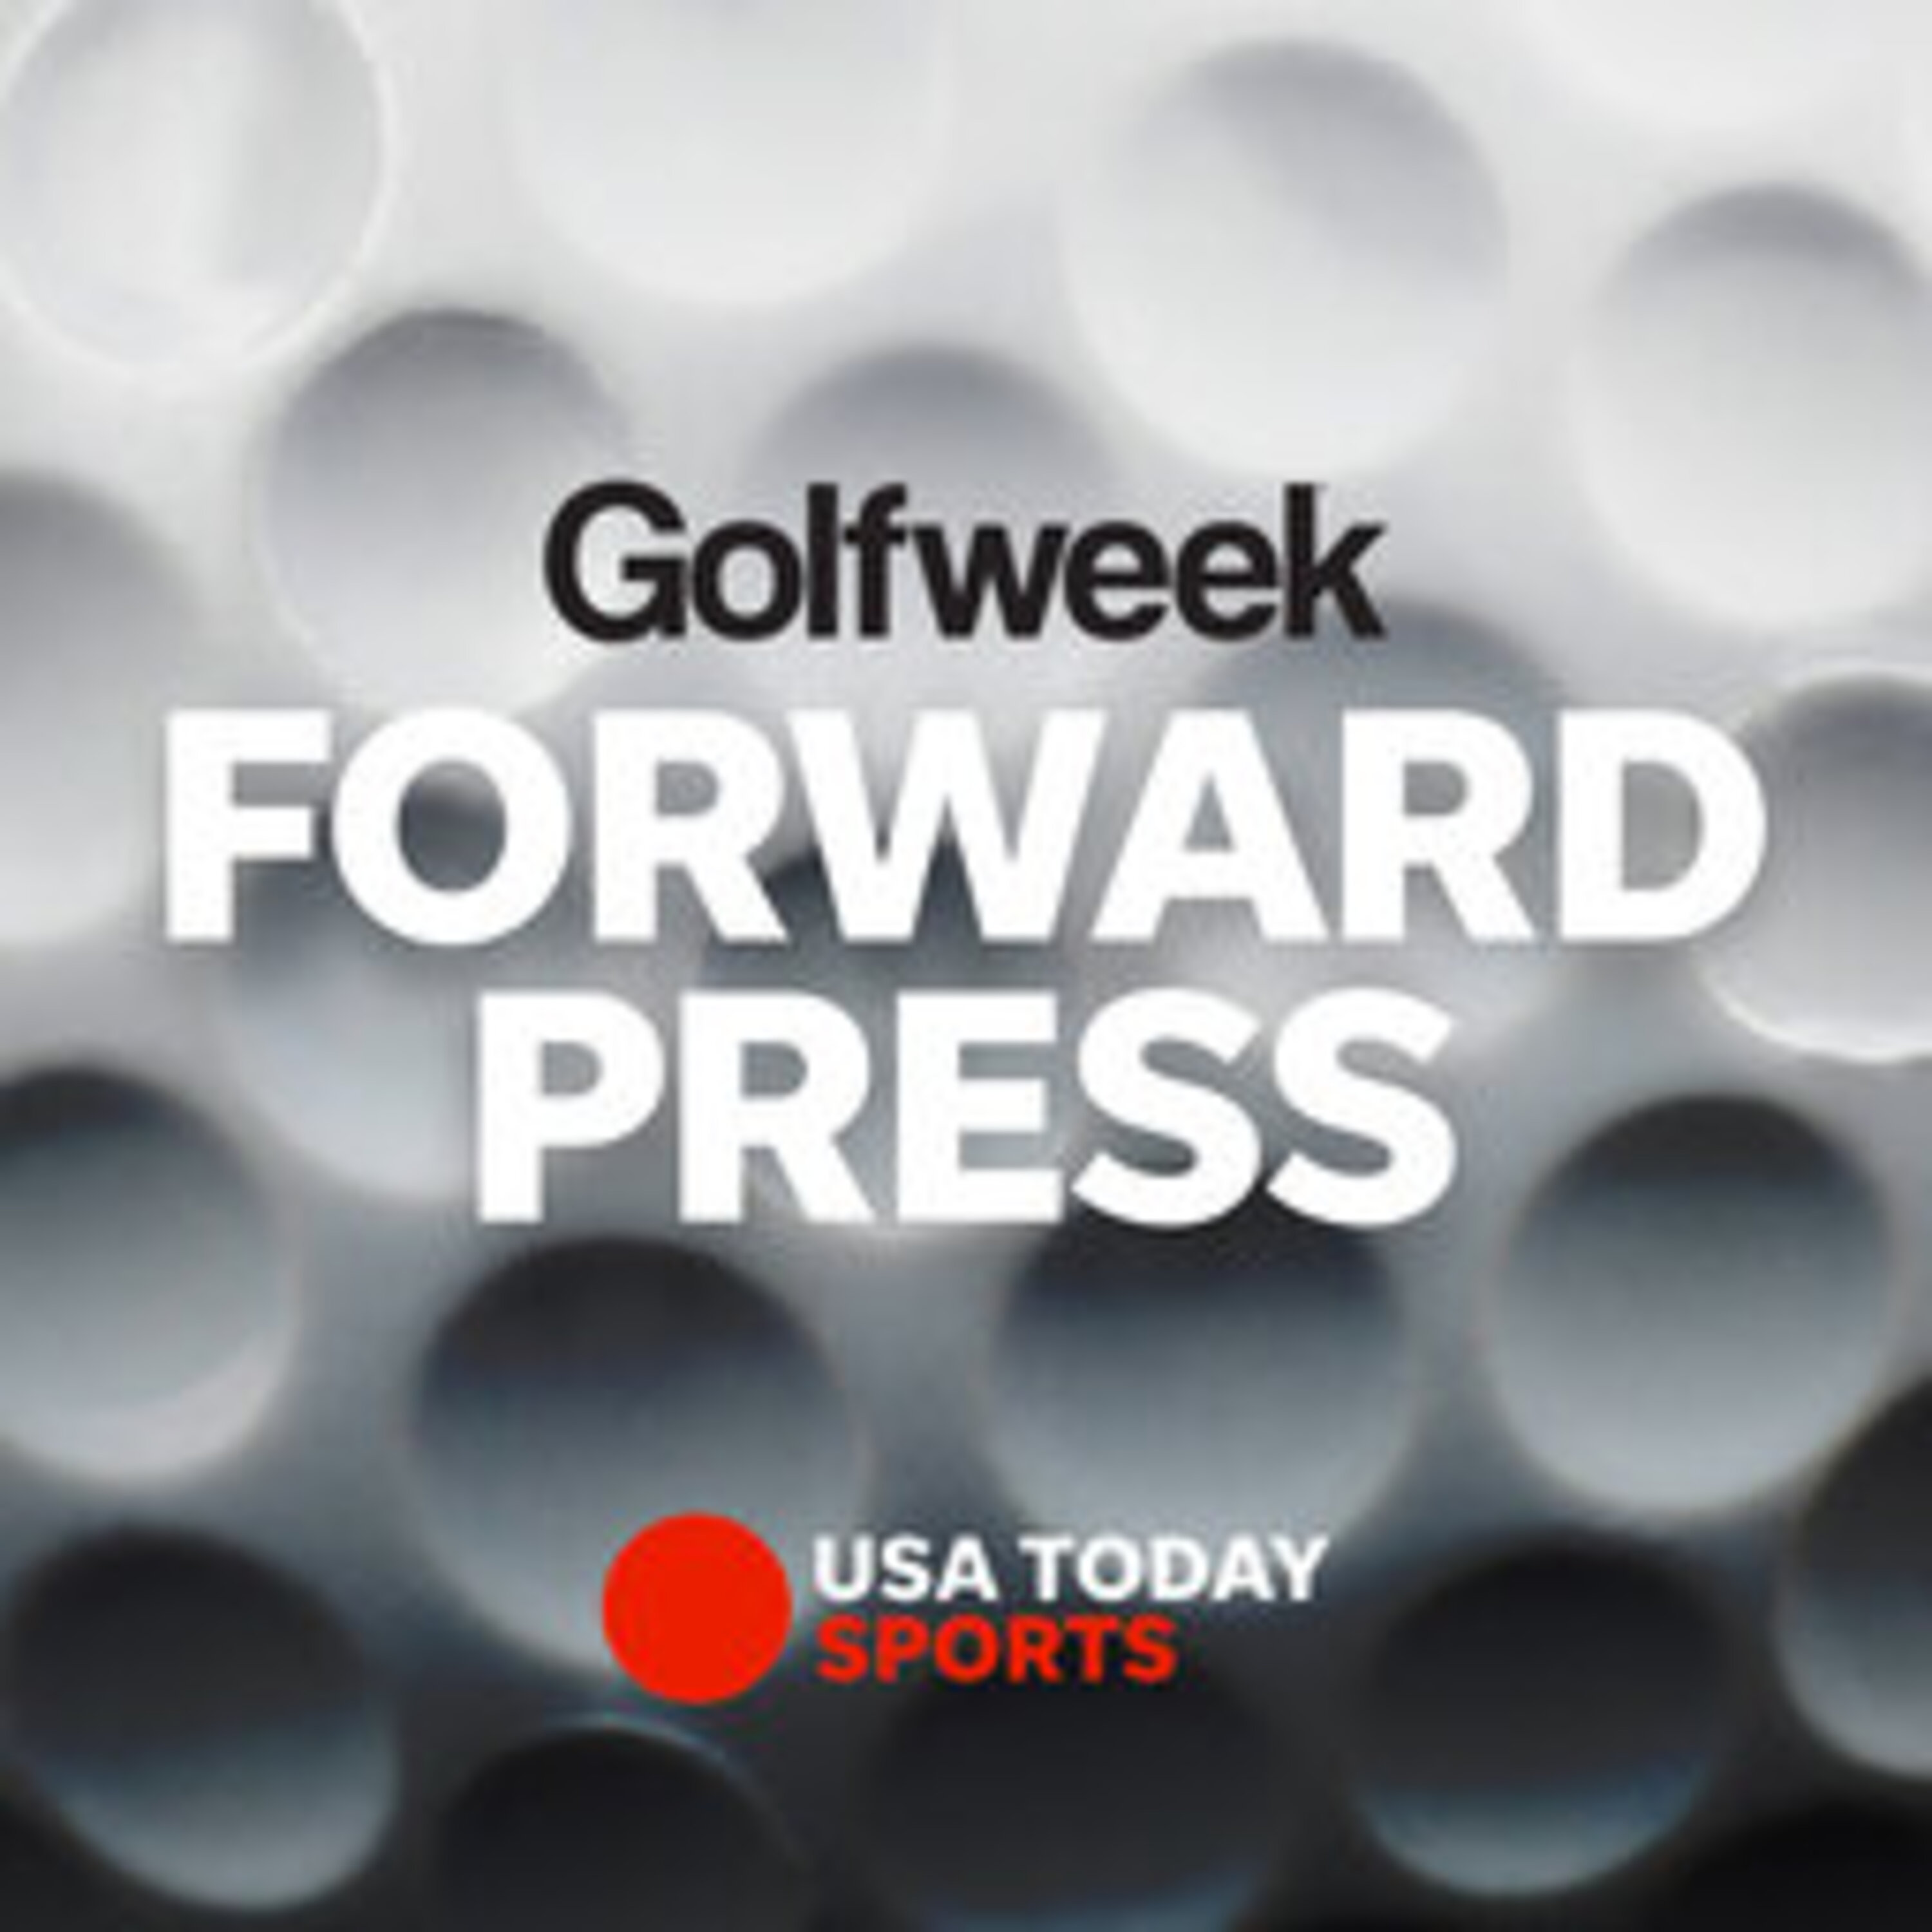 Tiger Woods injured in car wreck, what to expect moving forward, more